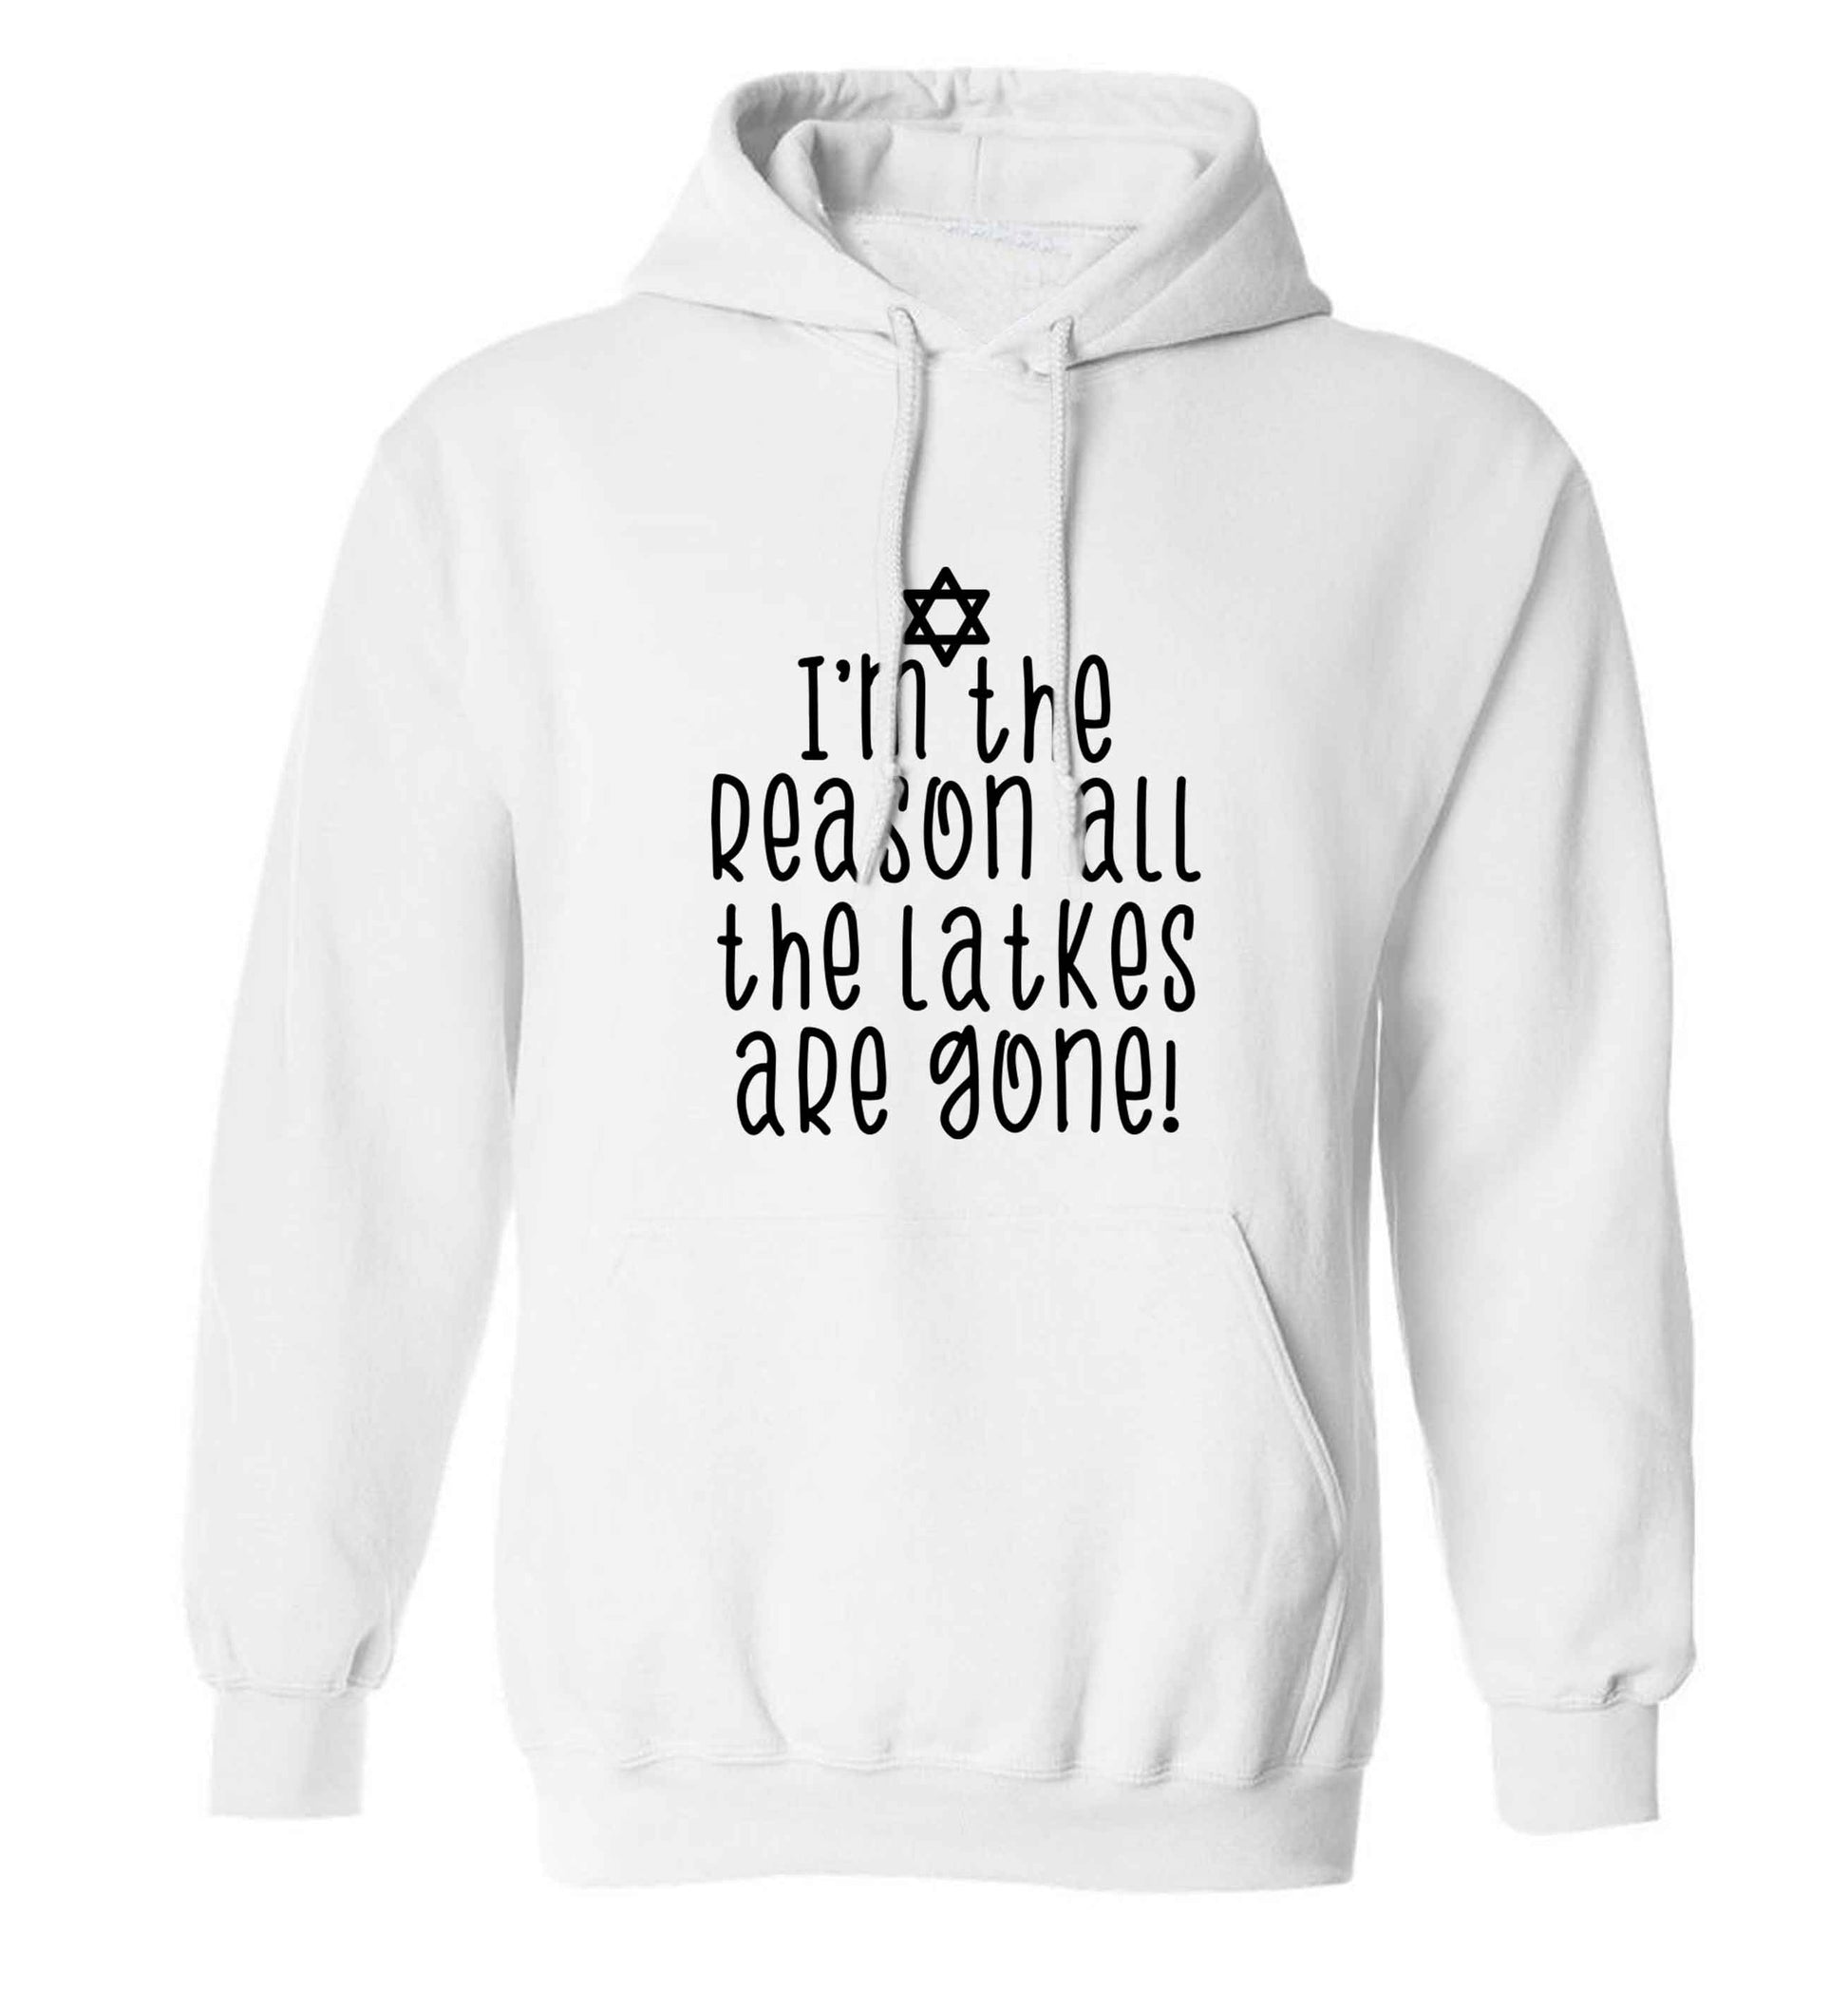 I'm the reason all the latkes are gone adults unisex white hoodie 2XL